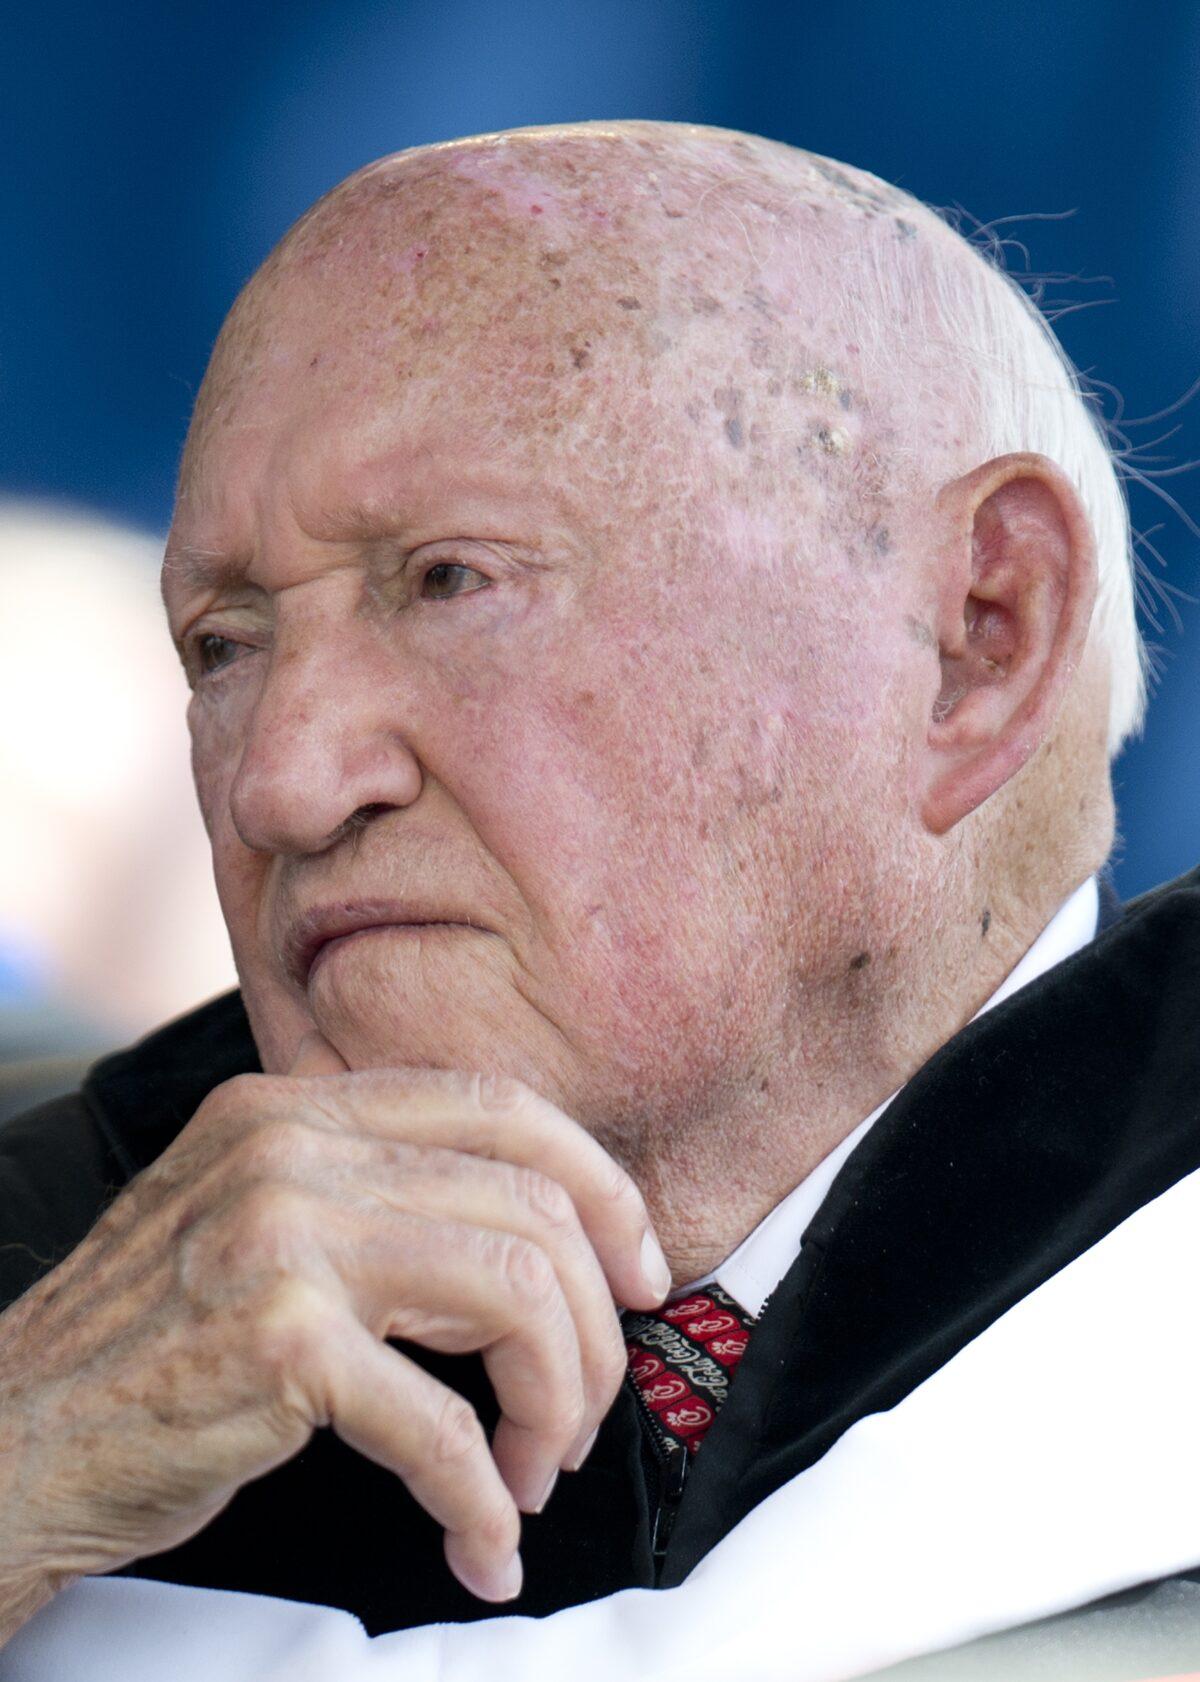 Chick-fil-A founder and Chairman S. Truett Cathy listens during the keynote address delivered by Republican presidential candidate Mitt Romney at Liberty University's 39th Annual Commencement in Lynchburg, Virginia, on May 12, 2012. (Jim Watson/AFP/GettyImages)